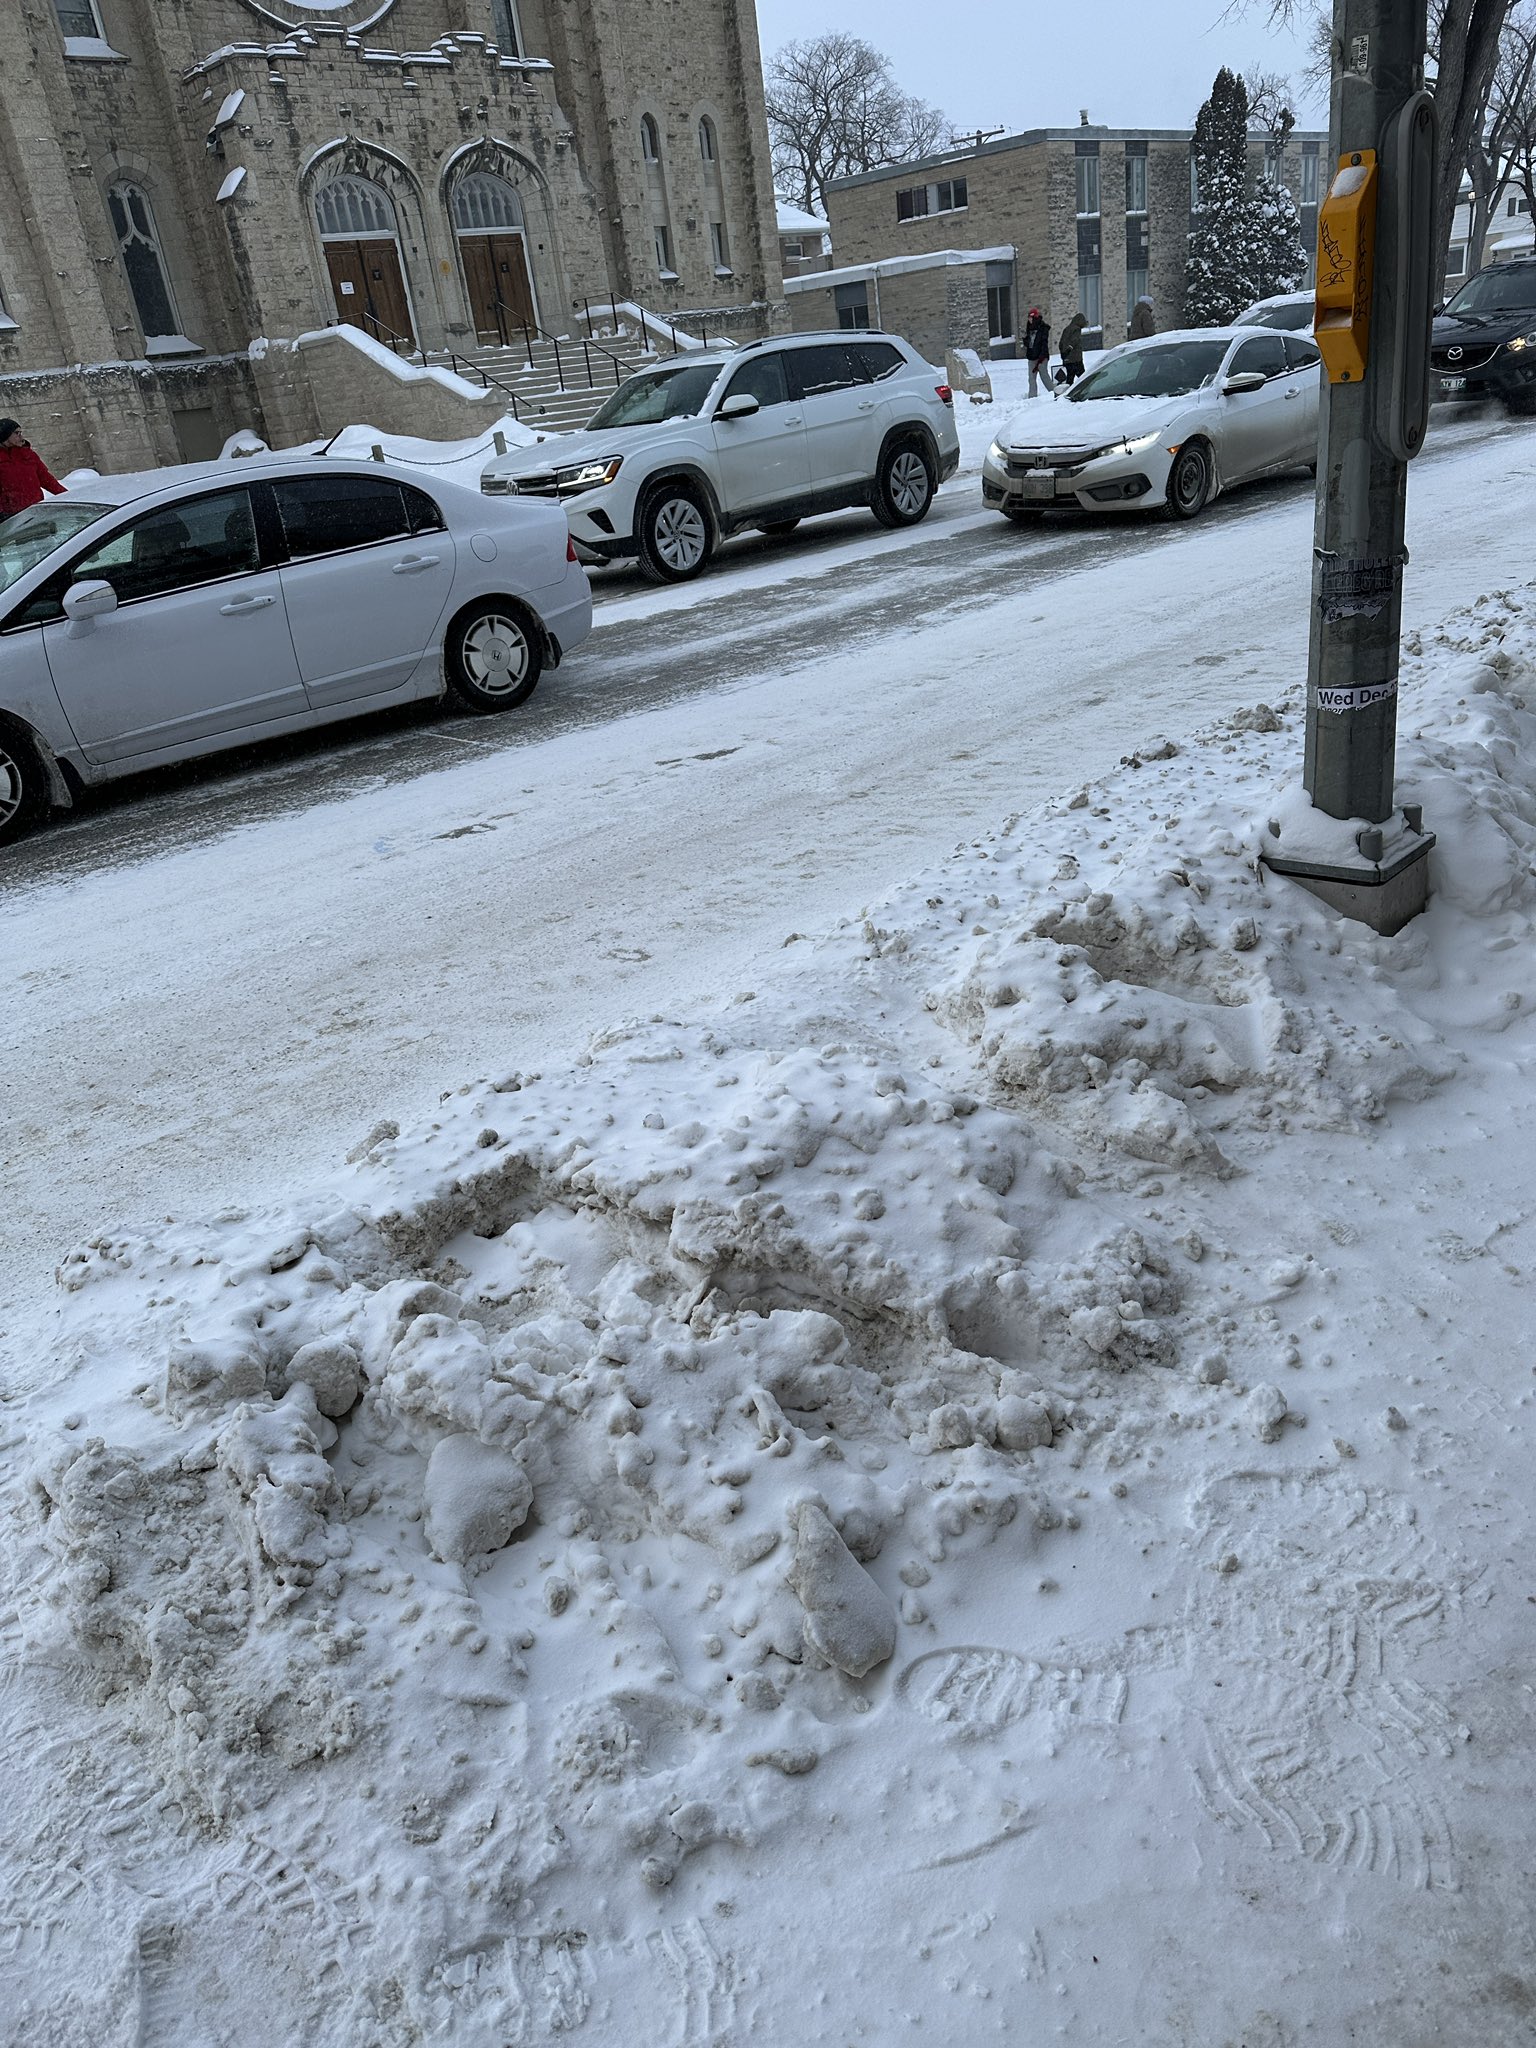 A snowbank along a sidewalk in Winnipeg. The snowbank obstructs both the path of travel and a pole that houses the pedestrian crossing push-button.